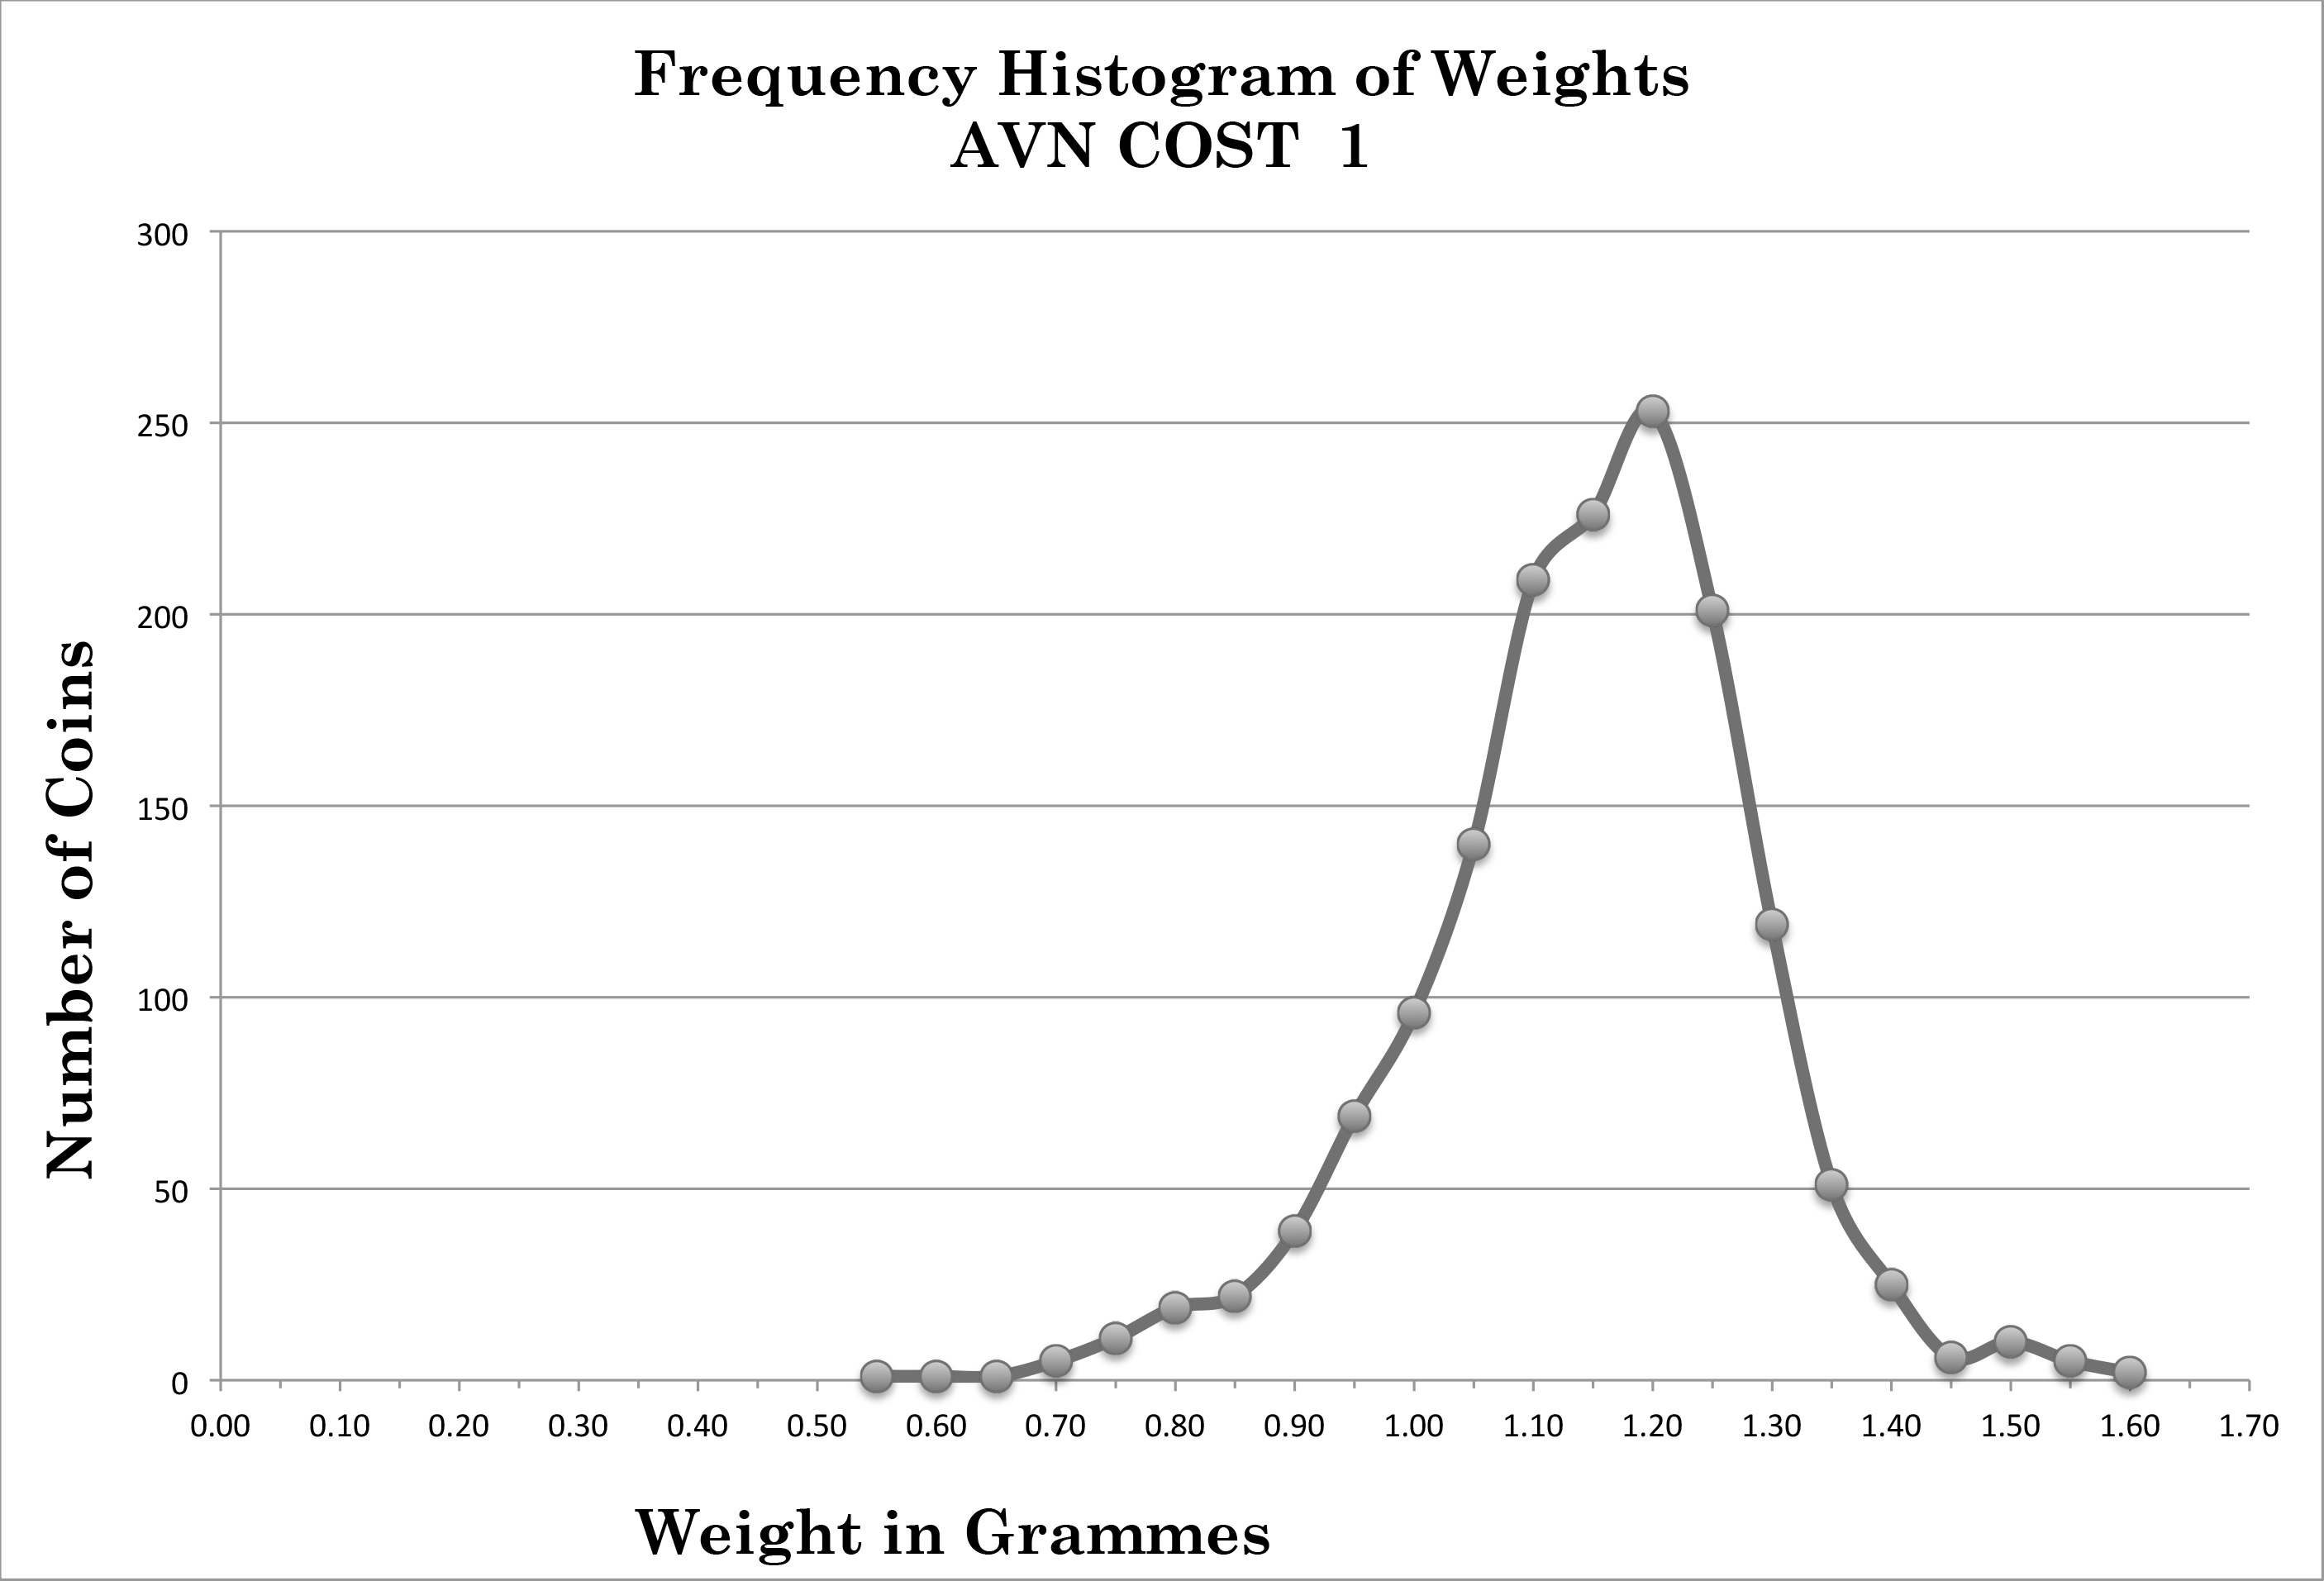 AVN COST frequency histogram